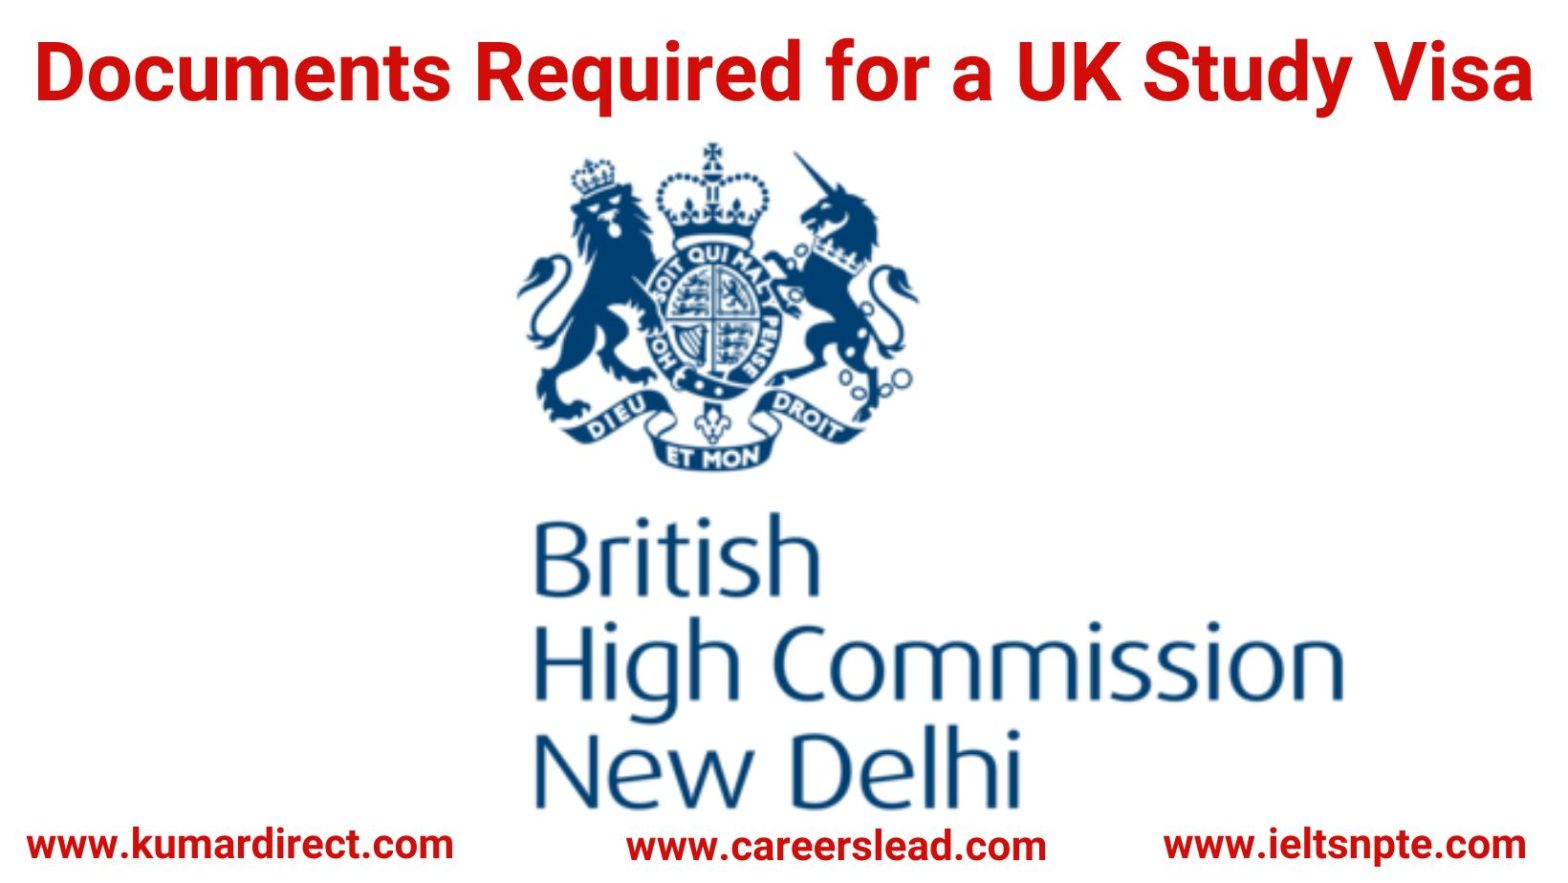 Documents required for a UK Study Visa